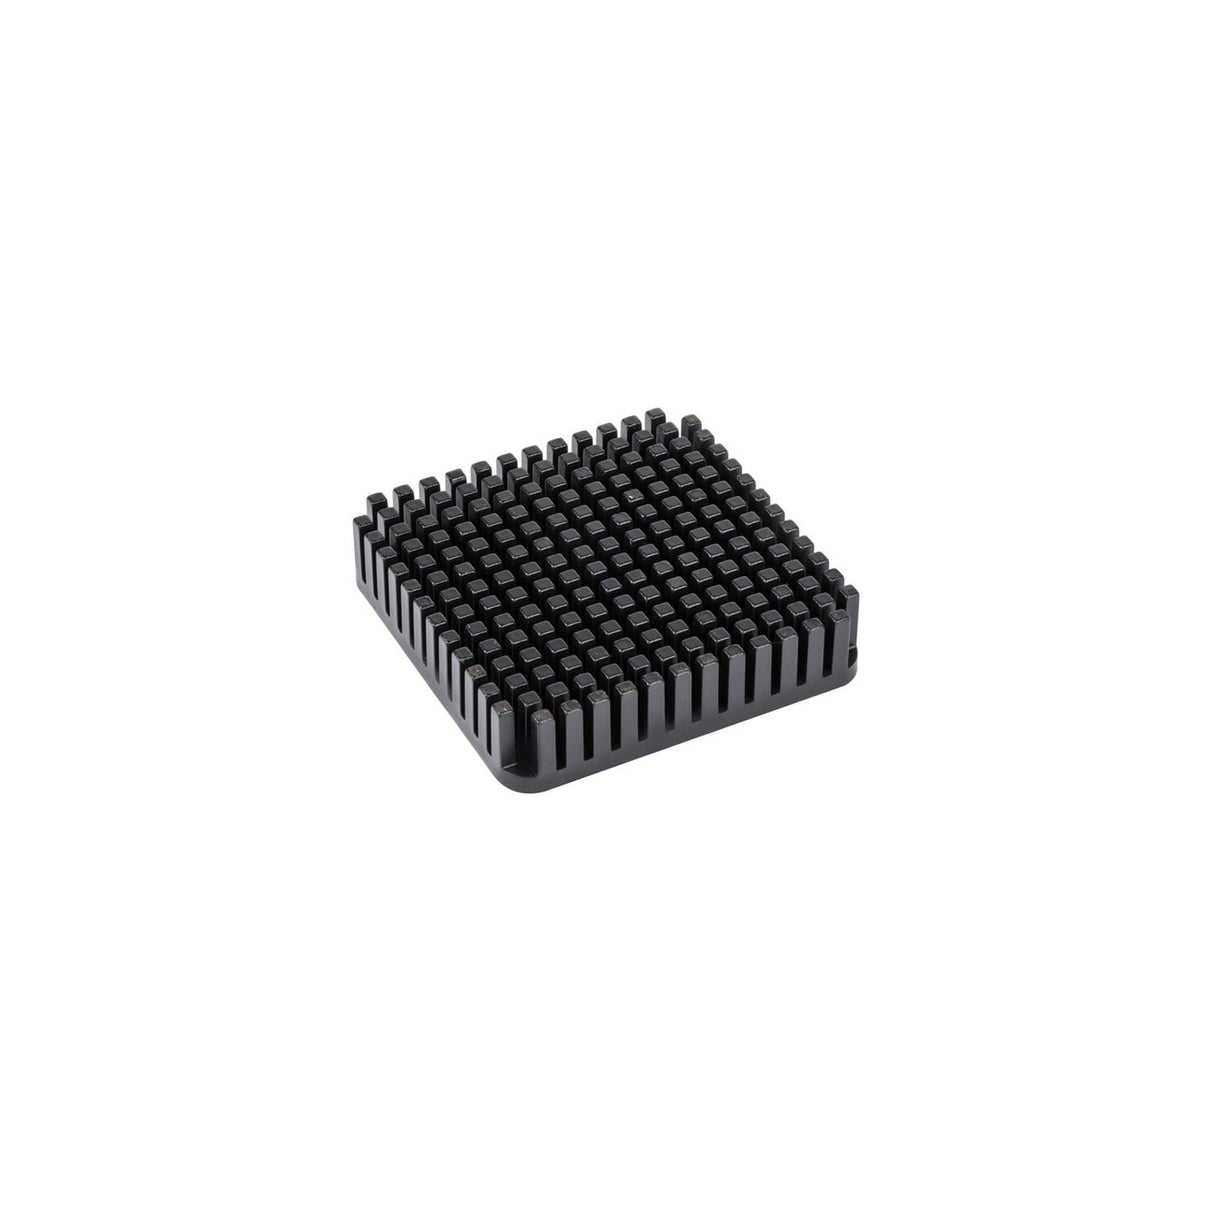 1/4" & 1/2" Push Block for FPDC-L Series